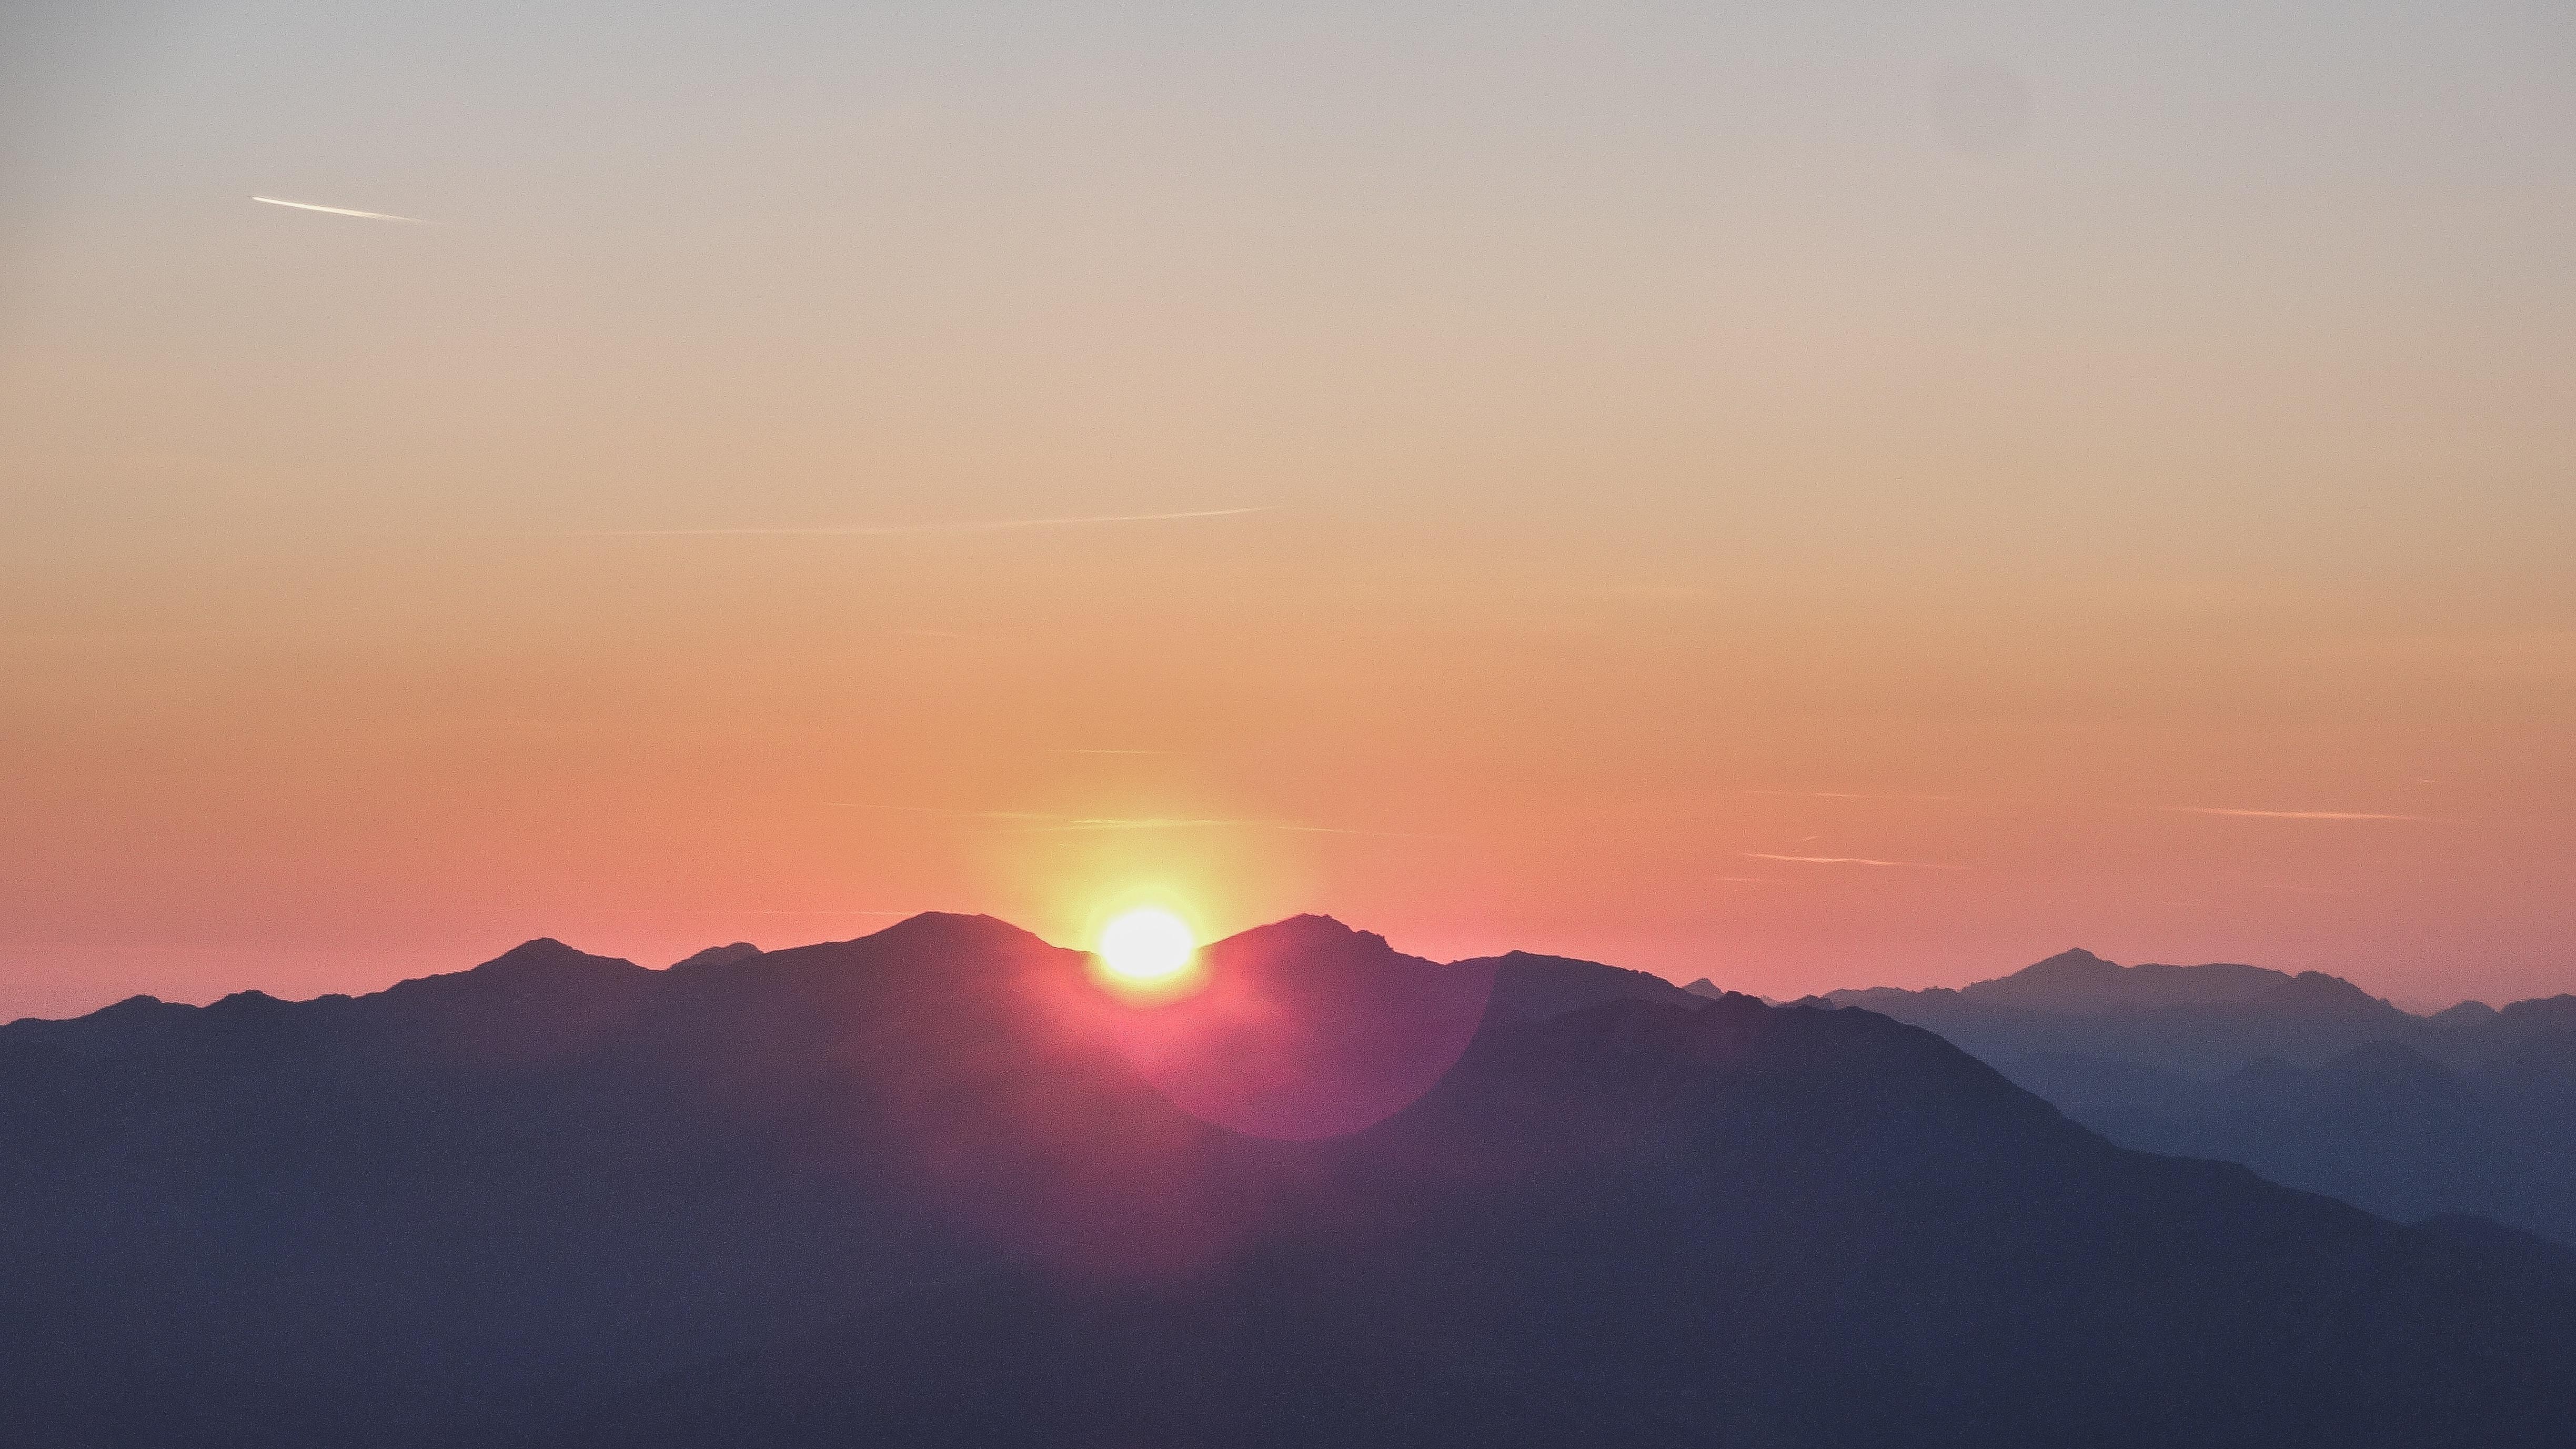 Mountain Sunrise Picture. Download Free Image